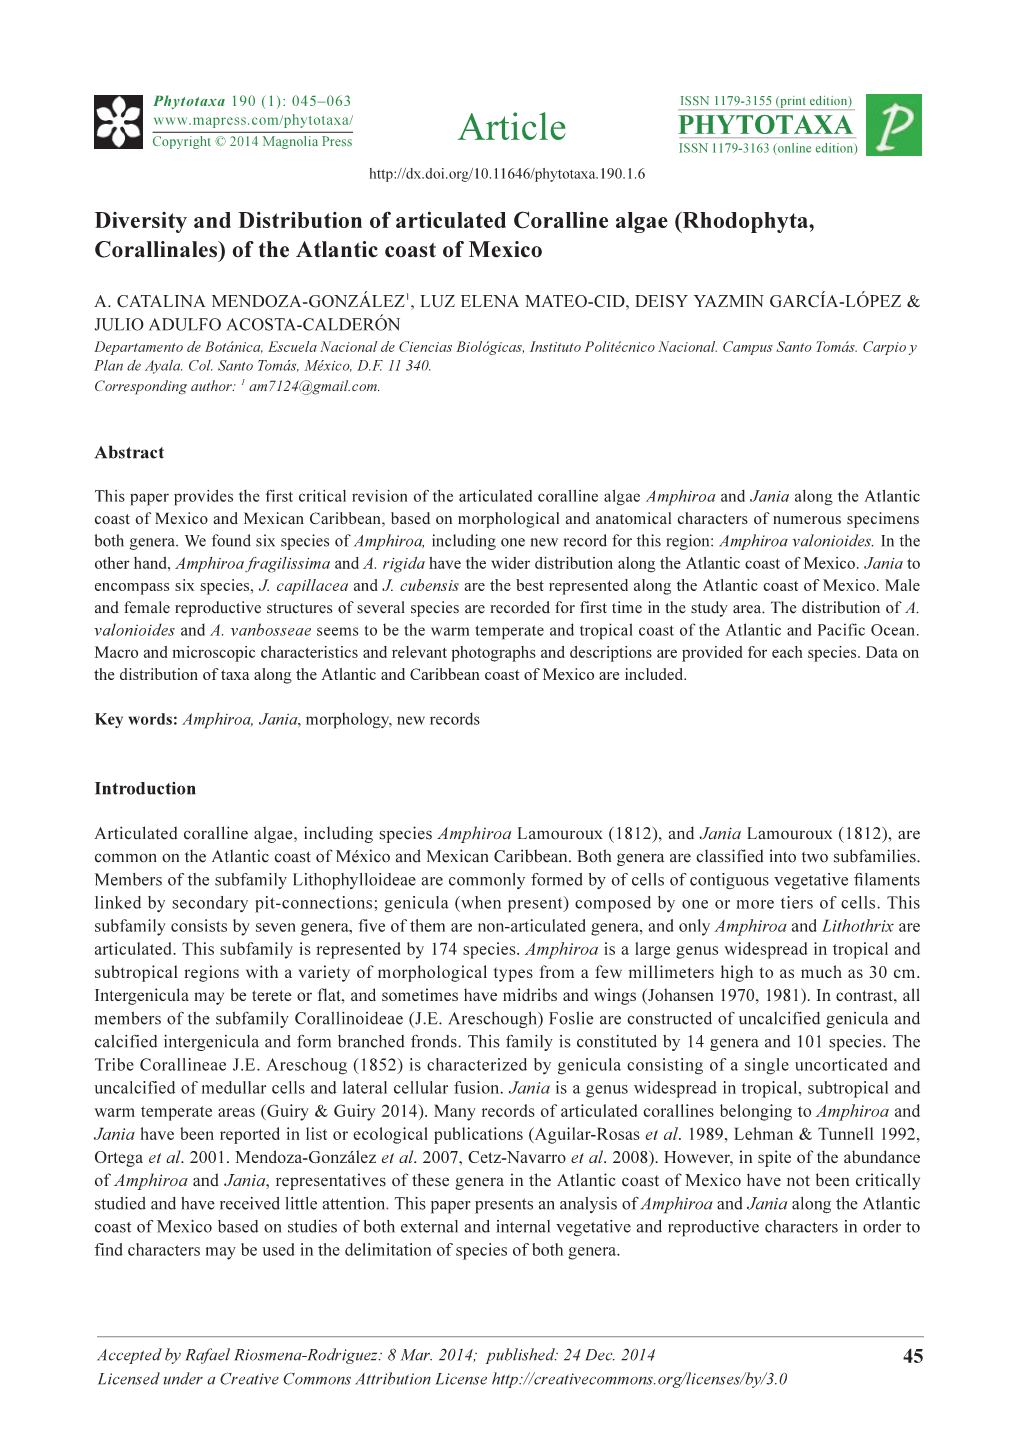 Diversity and Distribution of Articulated Coralline Algae (Rhodophyta, Corallinales) of the Atlantic Coast of Mexico